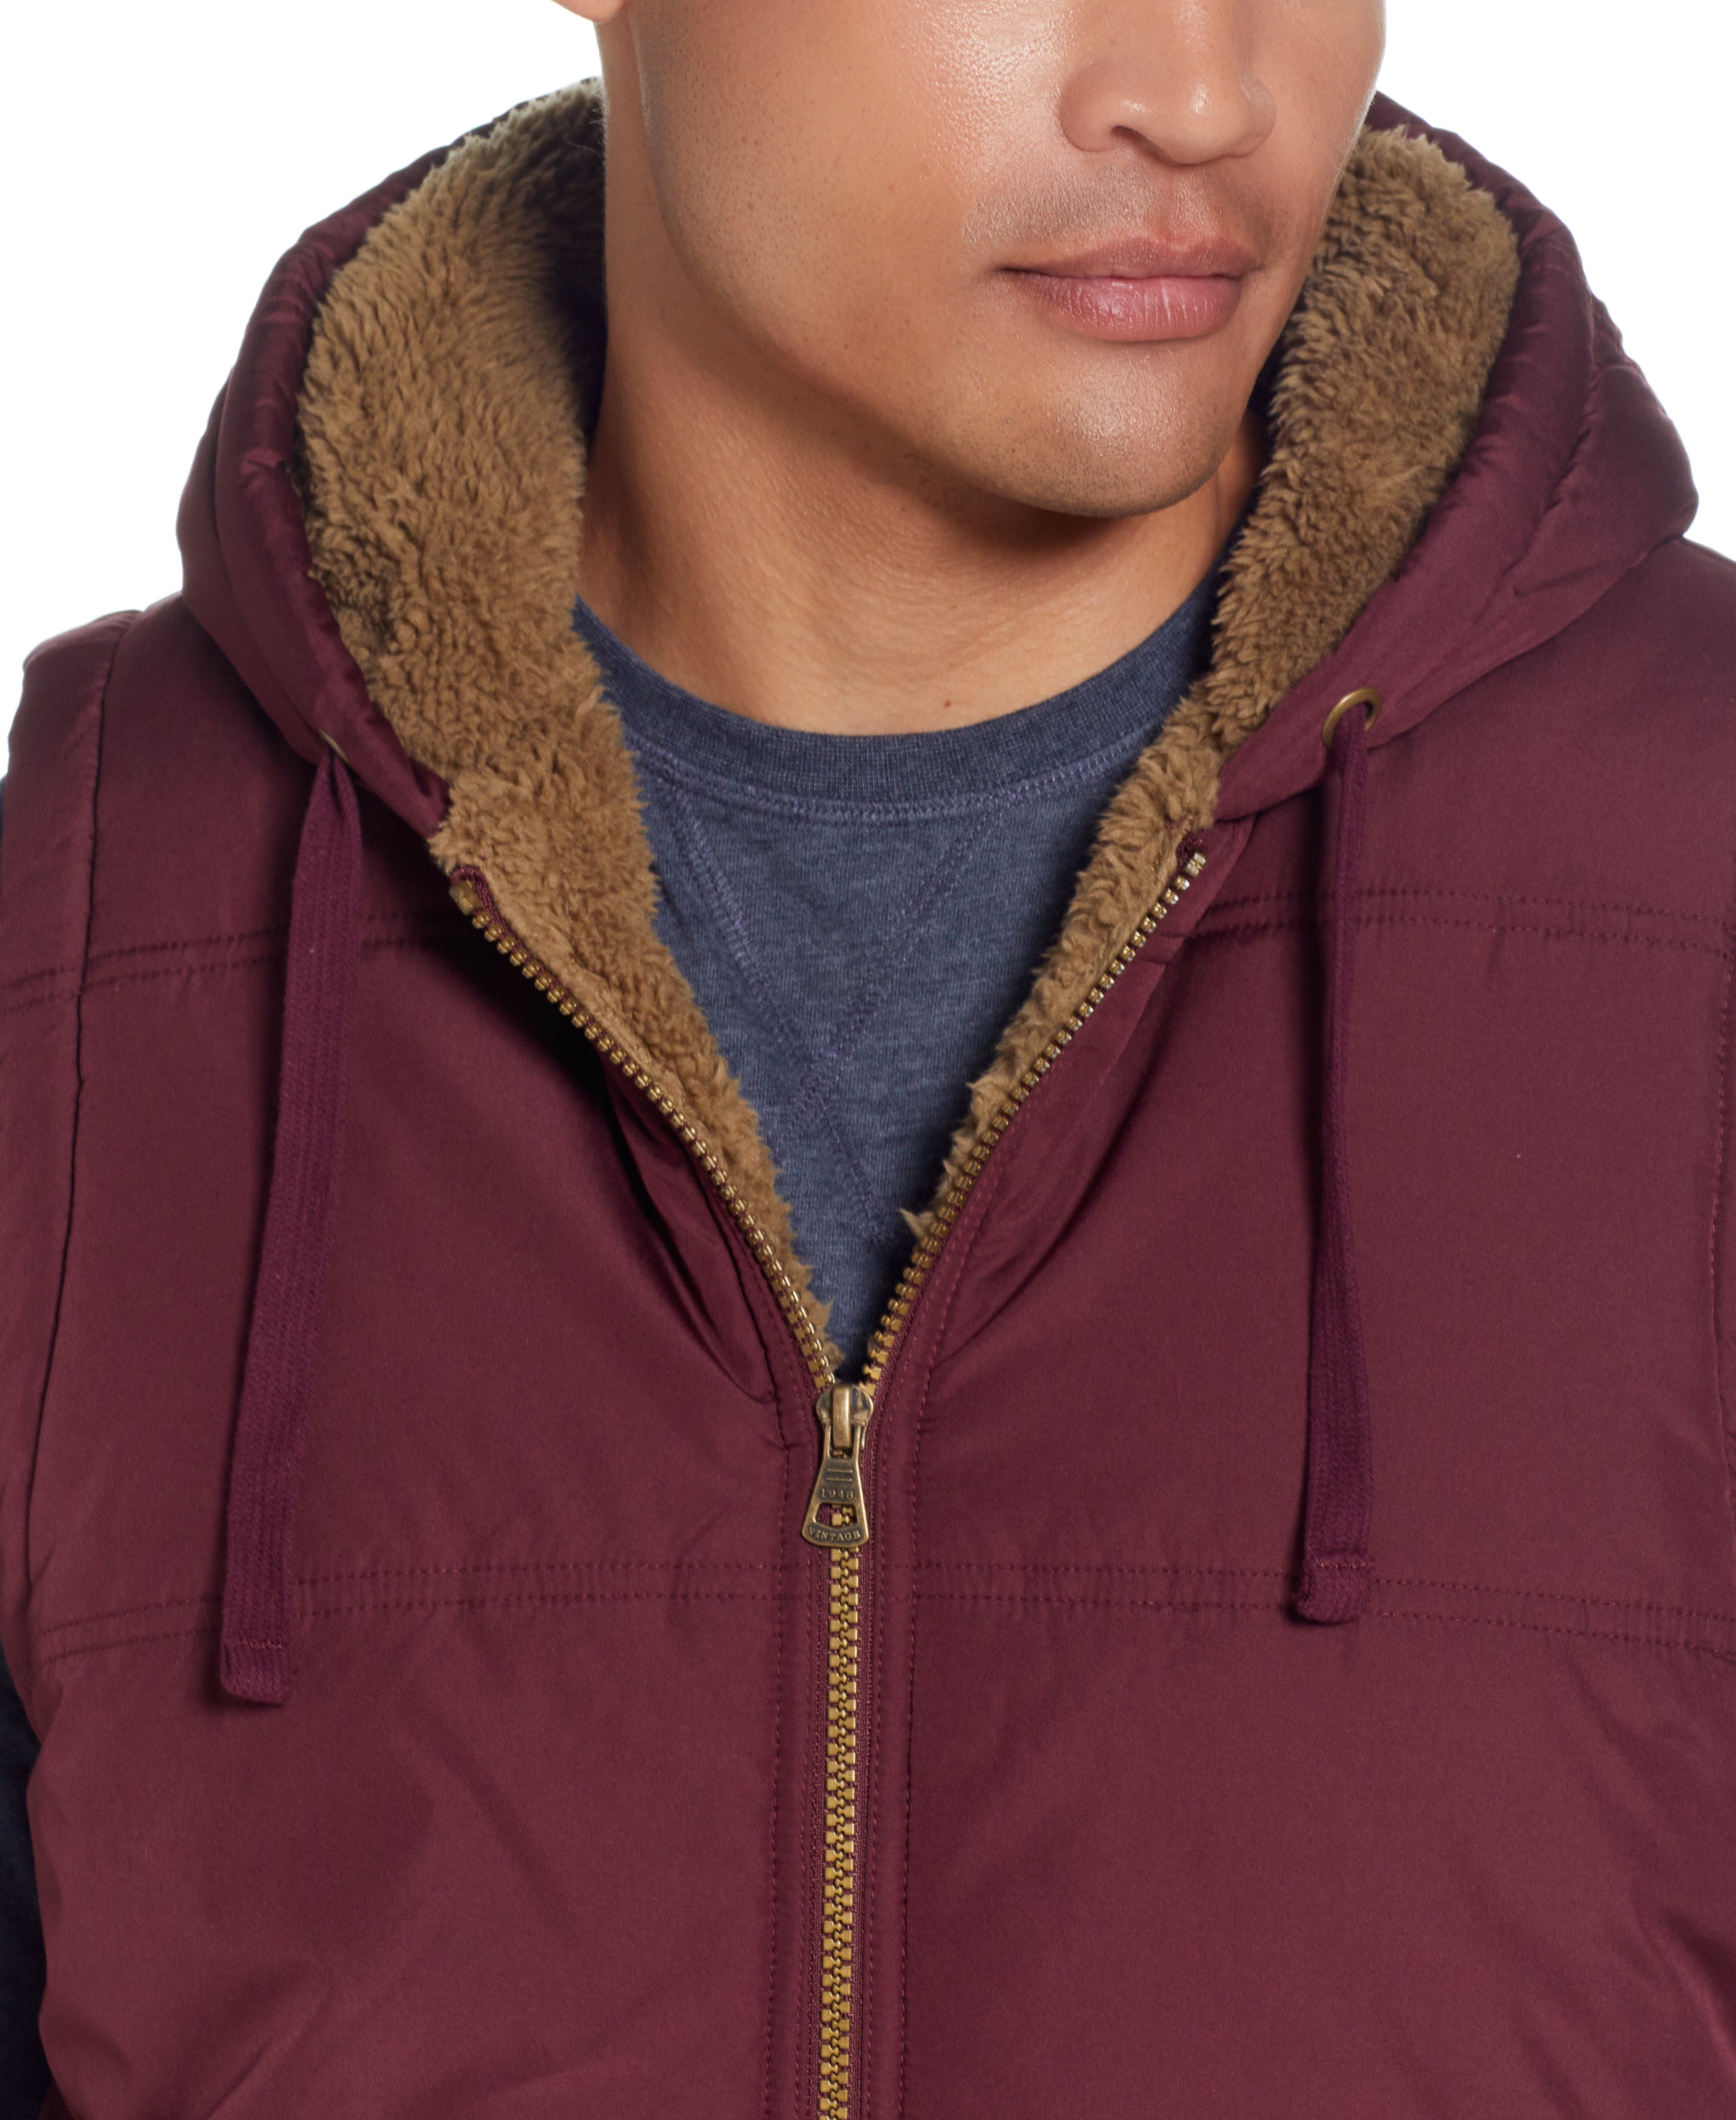 SHERPA LINED HOODED PUFFER VEST in PORT